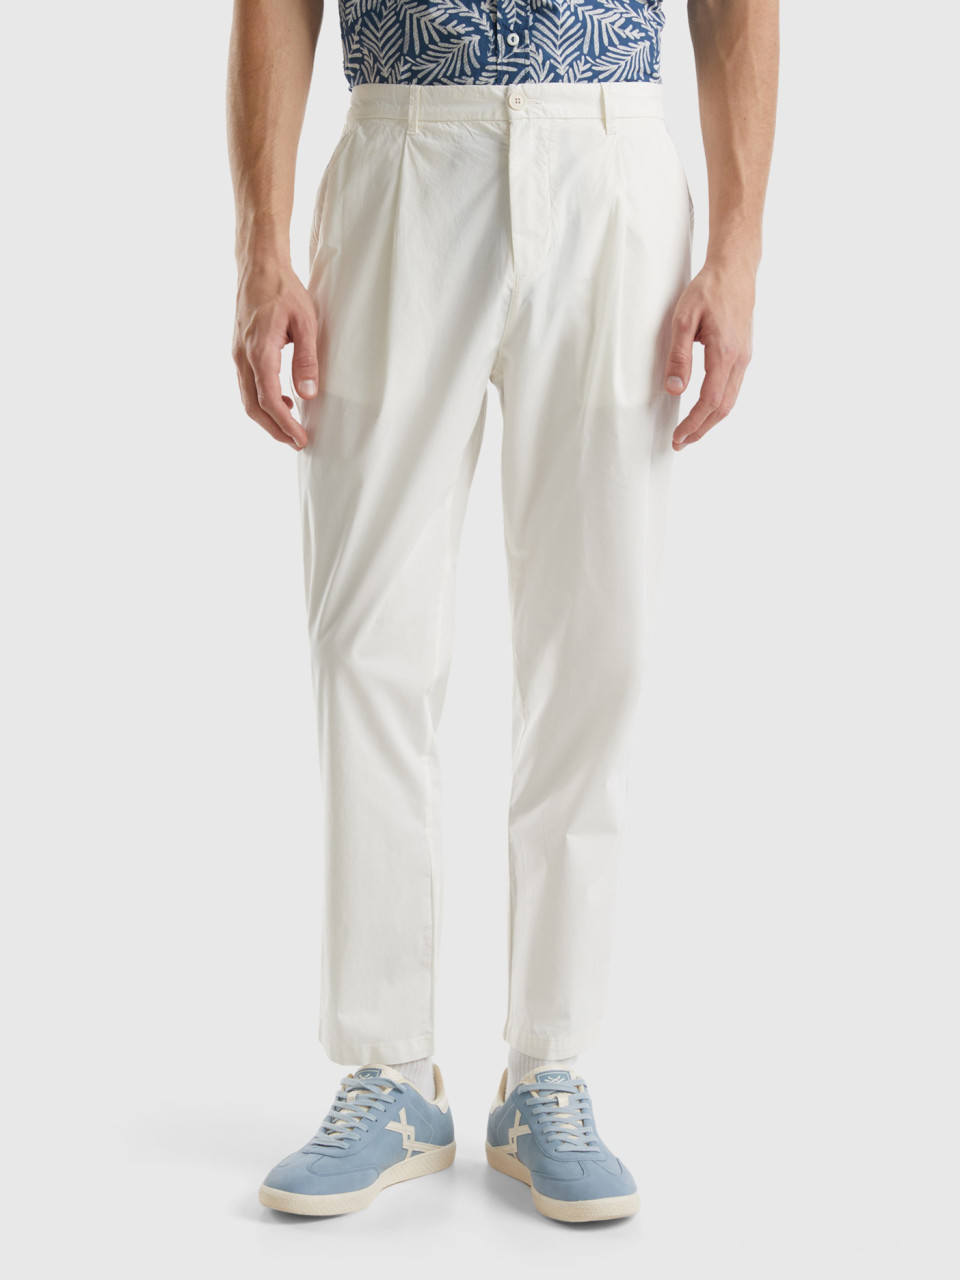 Benetton, Chino Carrot Fit, Cremeweiss, male